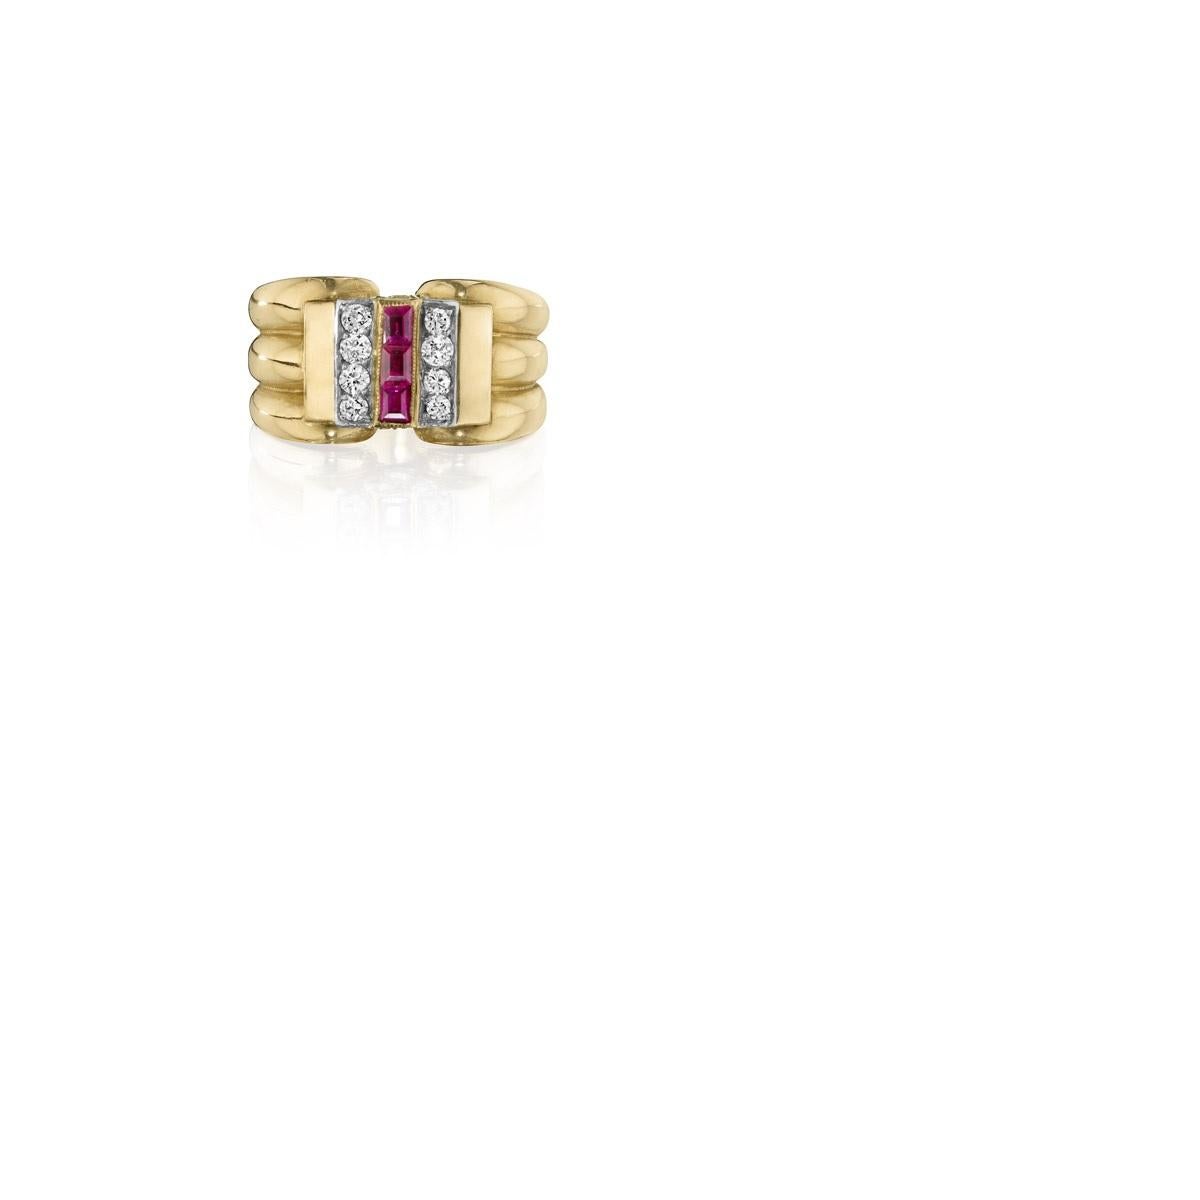 A French Retro 18 karat yellow gold and platinum ring with diamonds and rubies by Cartier. The ring has 14 round-cut diamonds with an approximate total weight of .56 carats, and 3 rectangular-cut rubies with an approximate total weight of .21